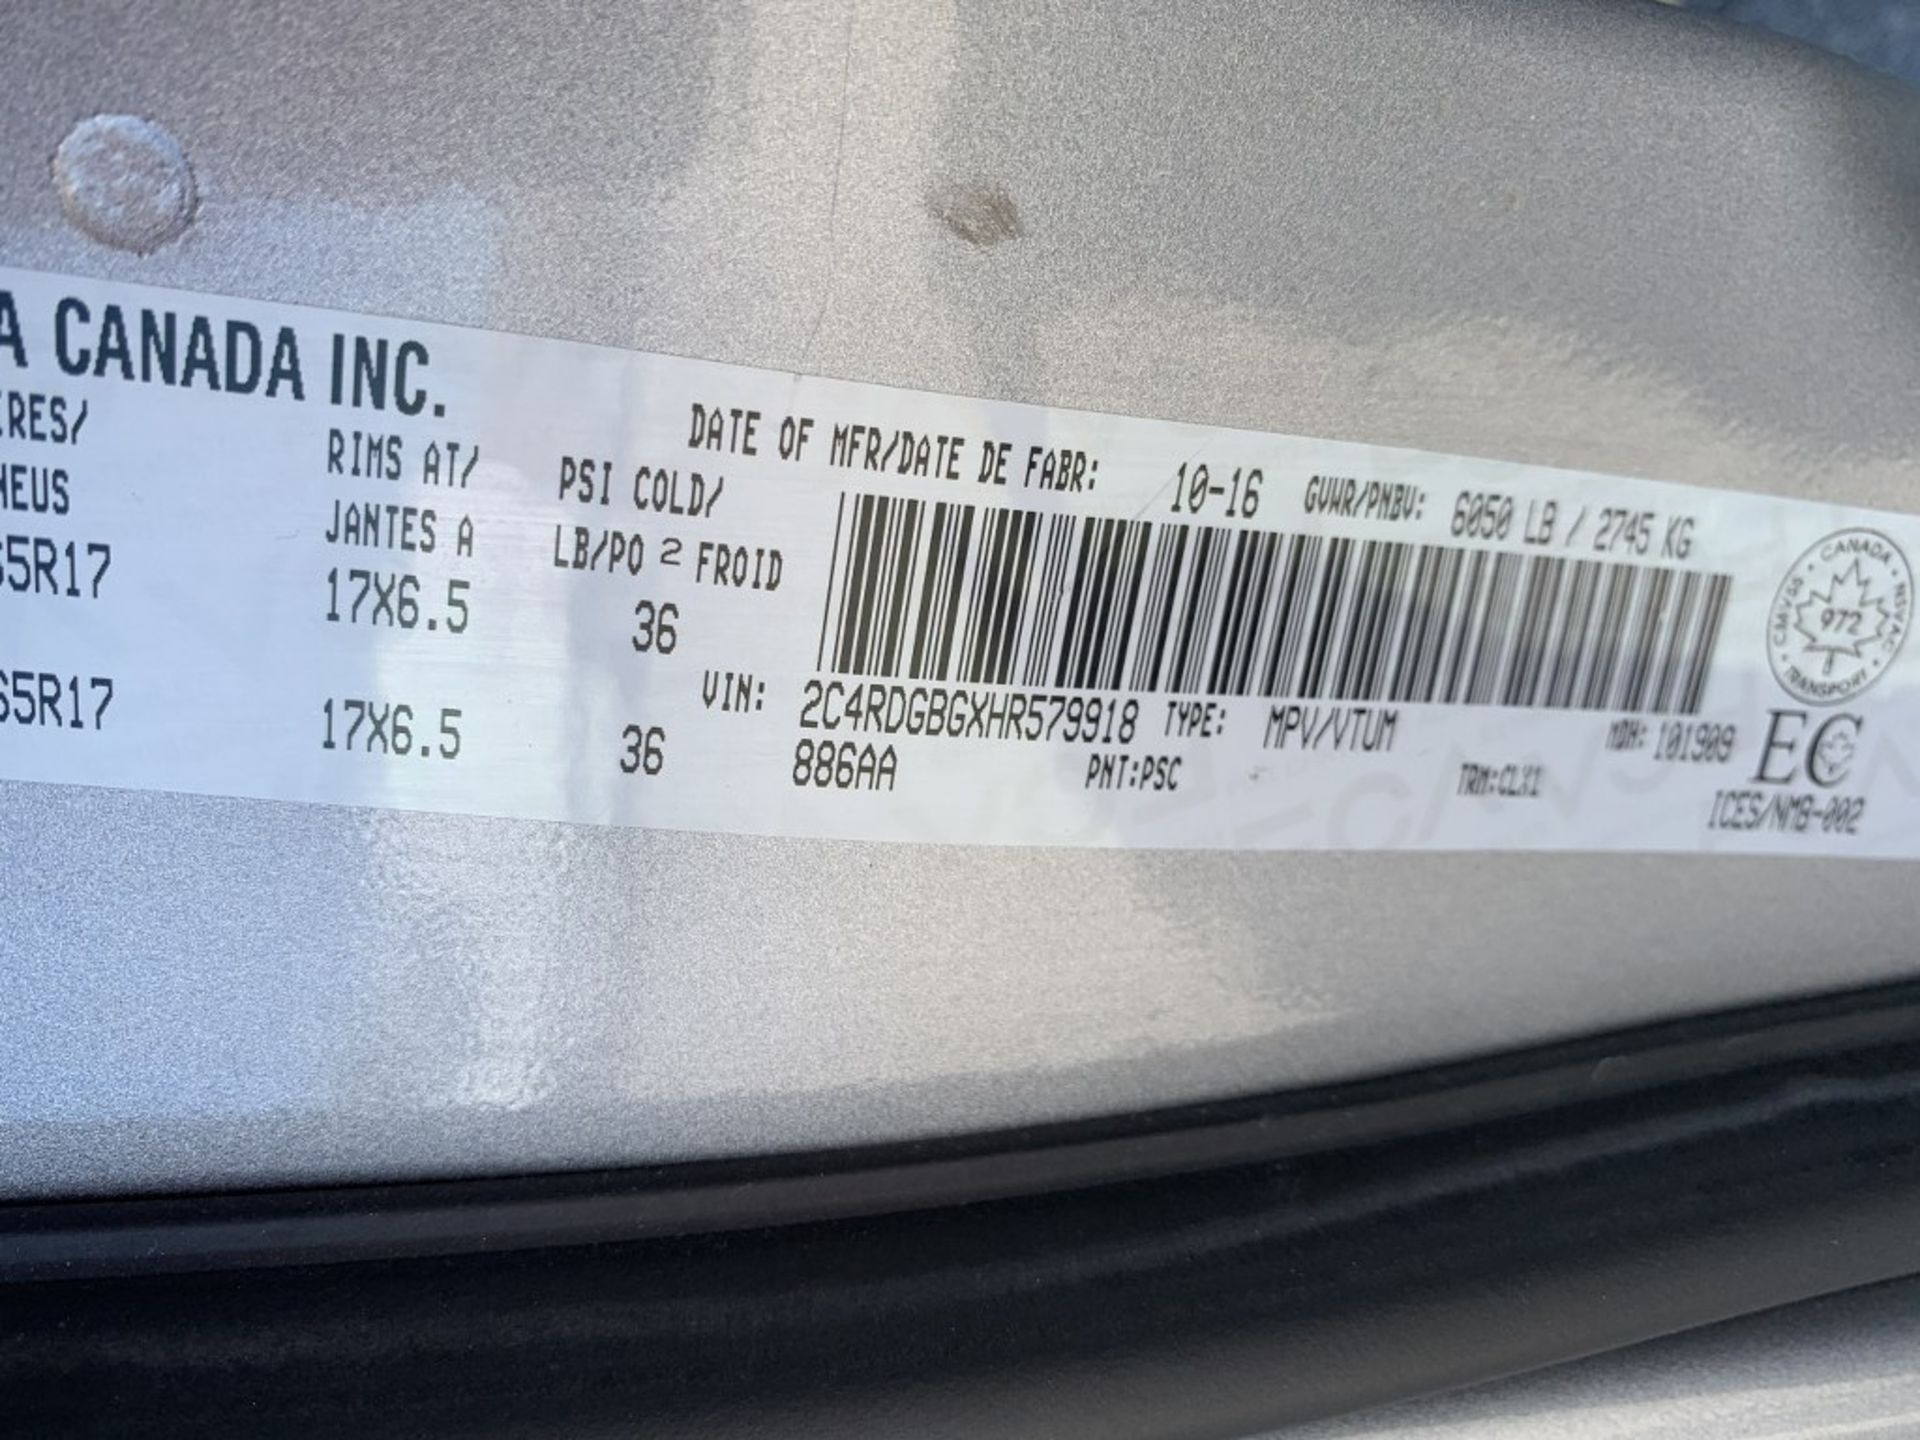 2017 - DODGE CARAVAN SE - 141,042KM - VIN# 2C4RDGBGXHR579918 - ALL VEHICLES ARE SOLD AS IS WHERE - Image 9 of 9